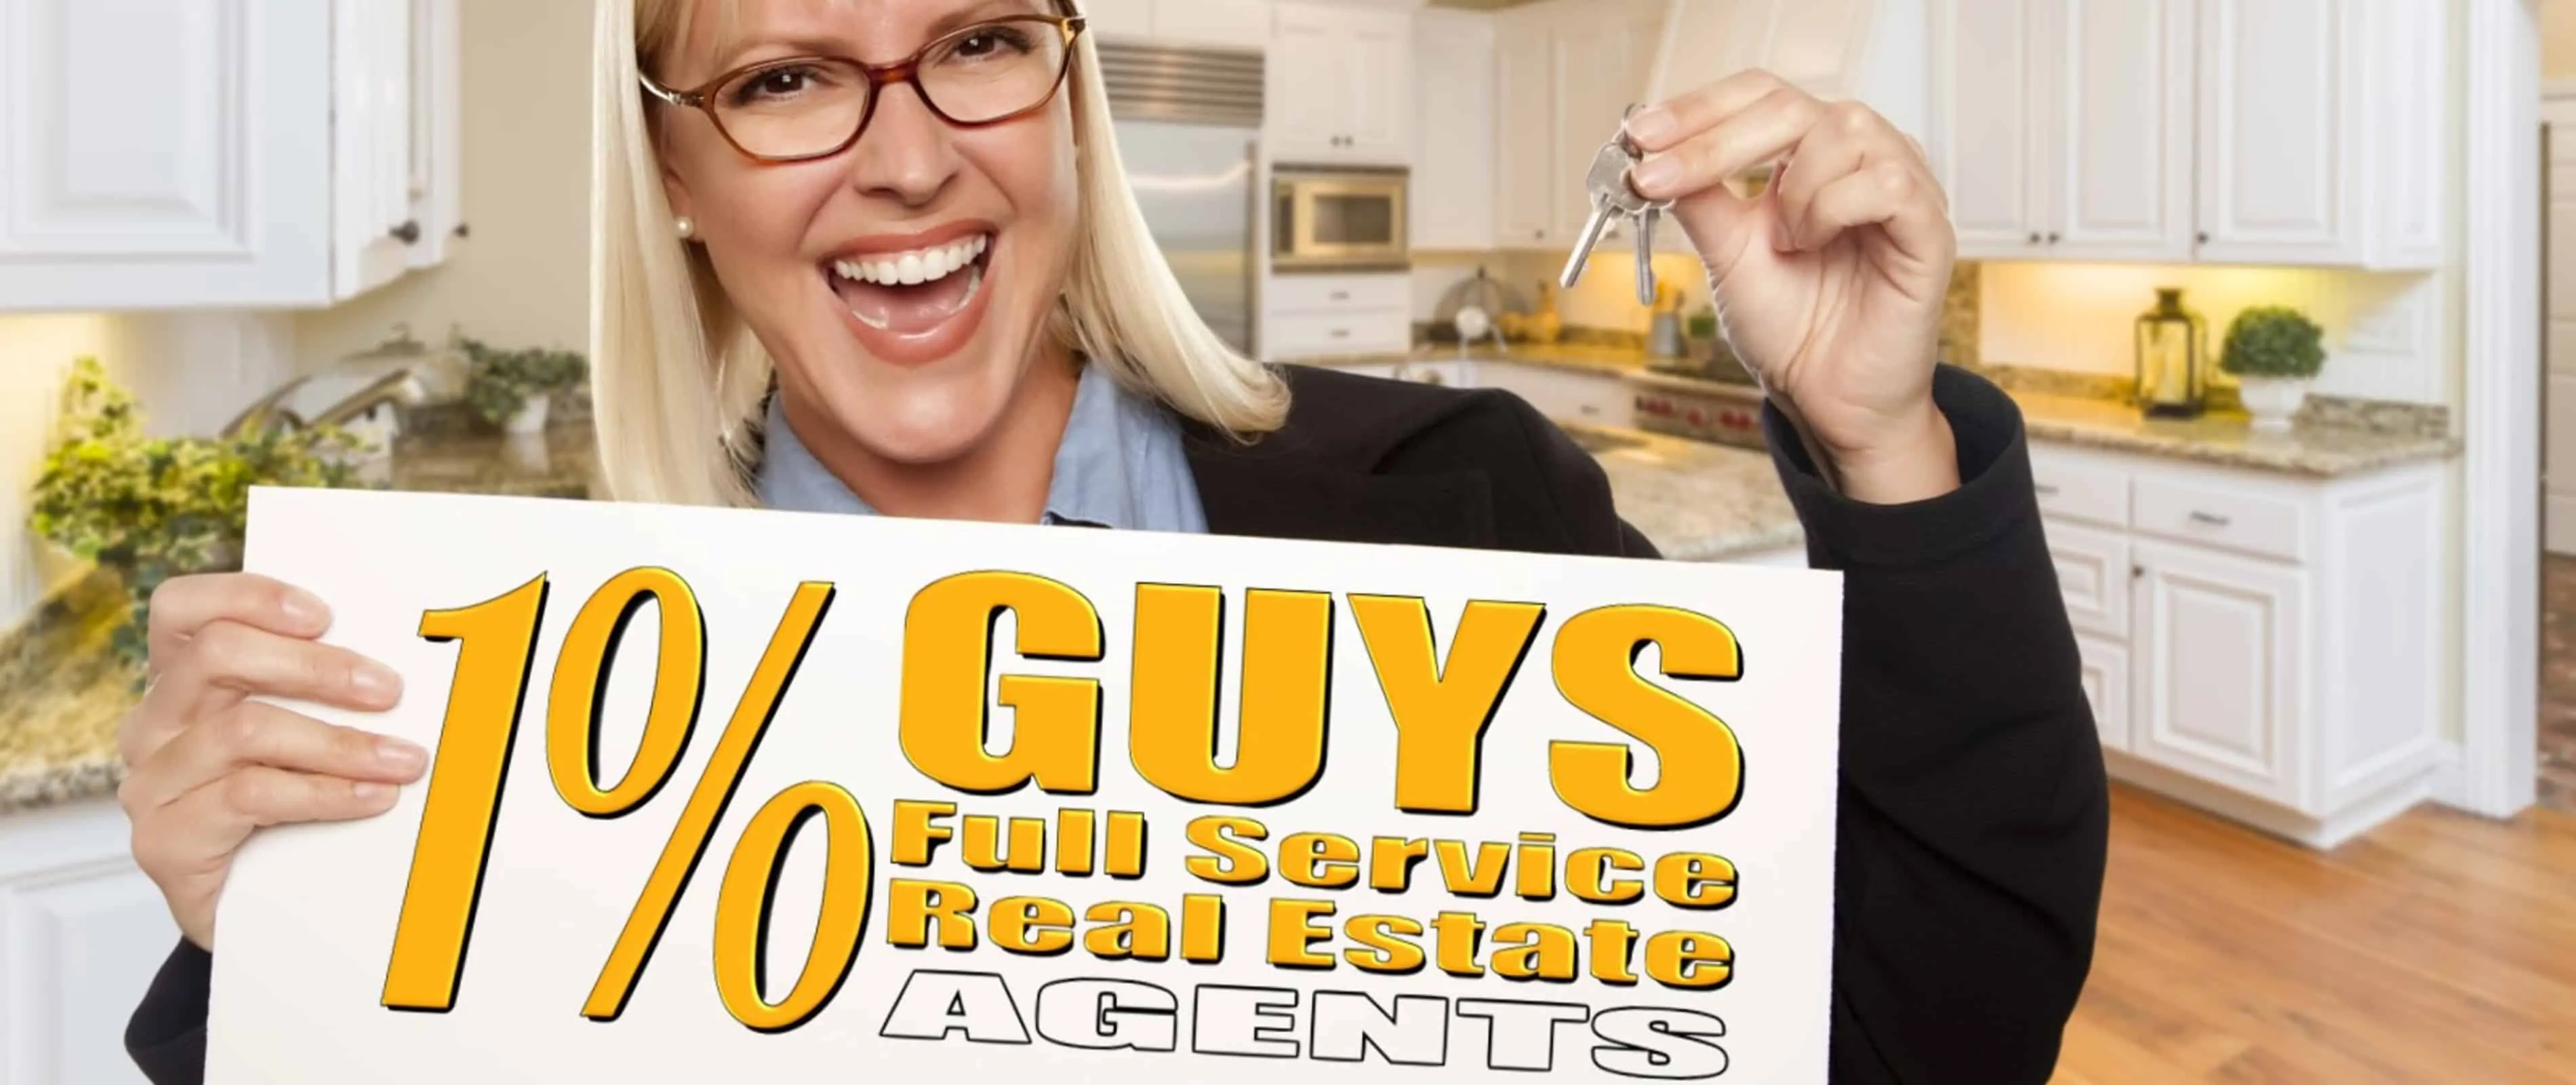 1% Guys Full Service Real Estate Agents